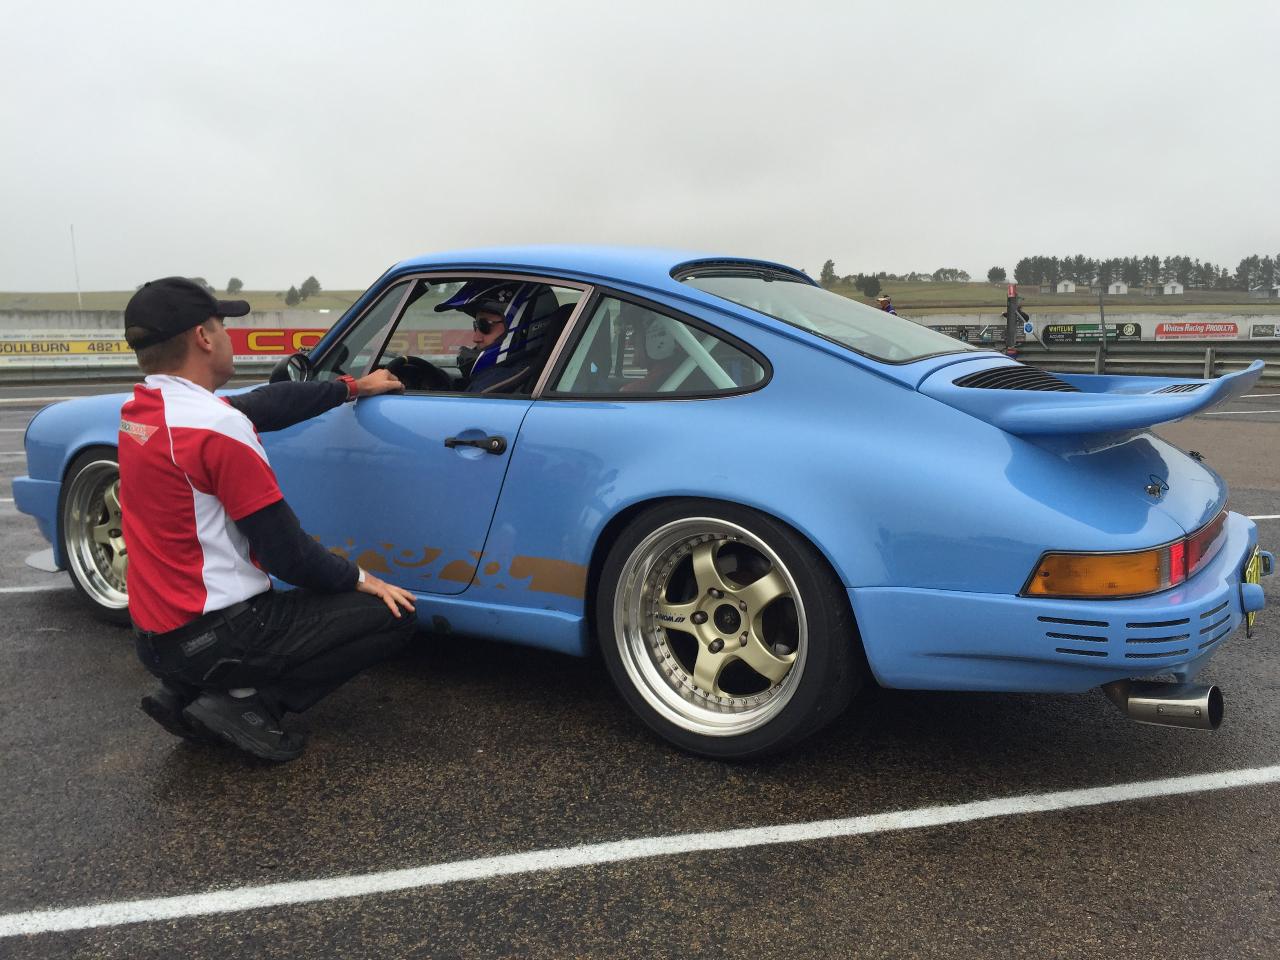 50 lap track Full Day with instruction - Historic Porsche 911